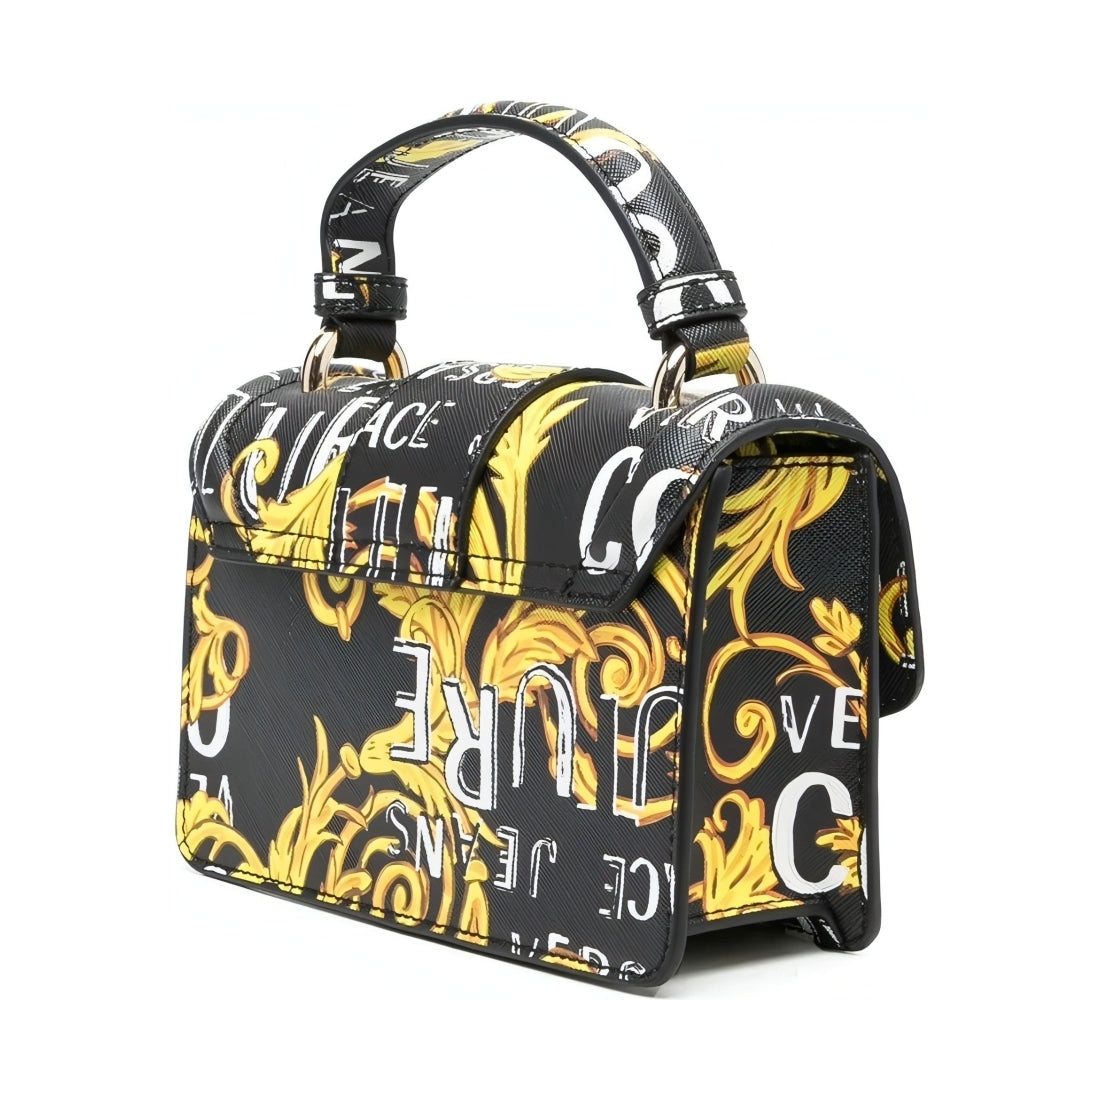 Versace Jeans Couture womens black, gold couture crossbody | Vilbury London